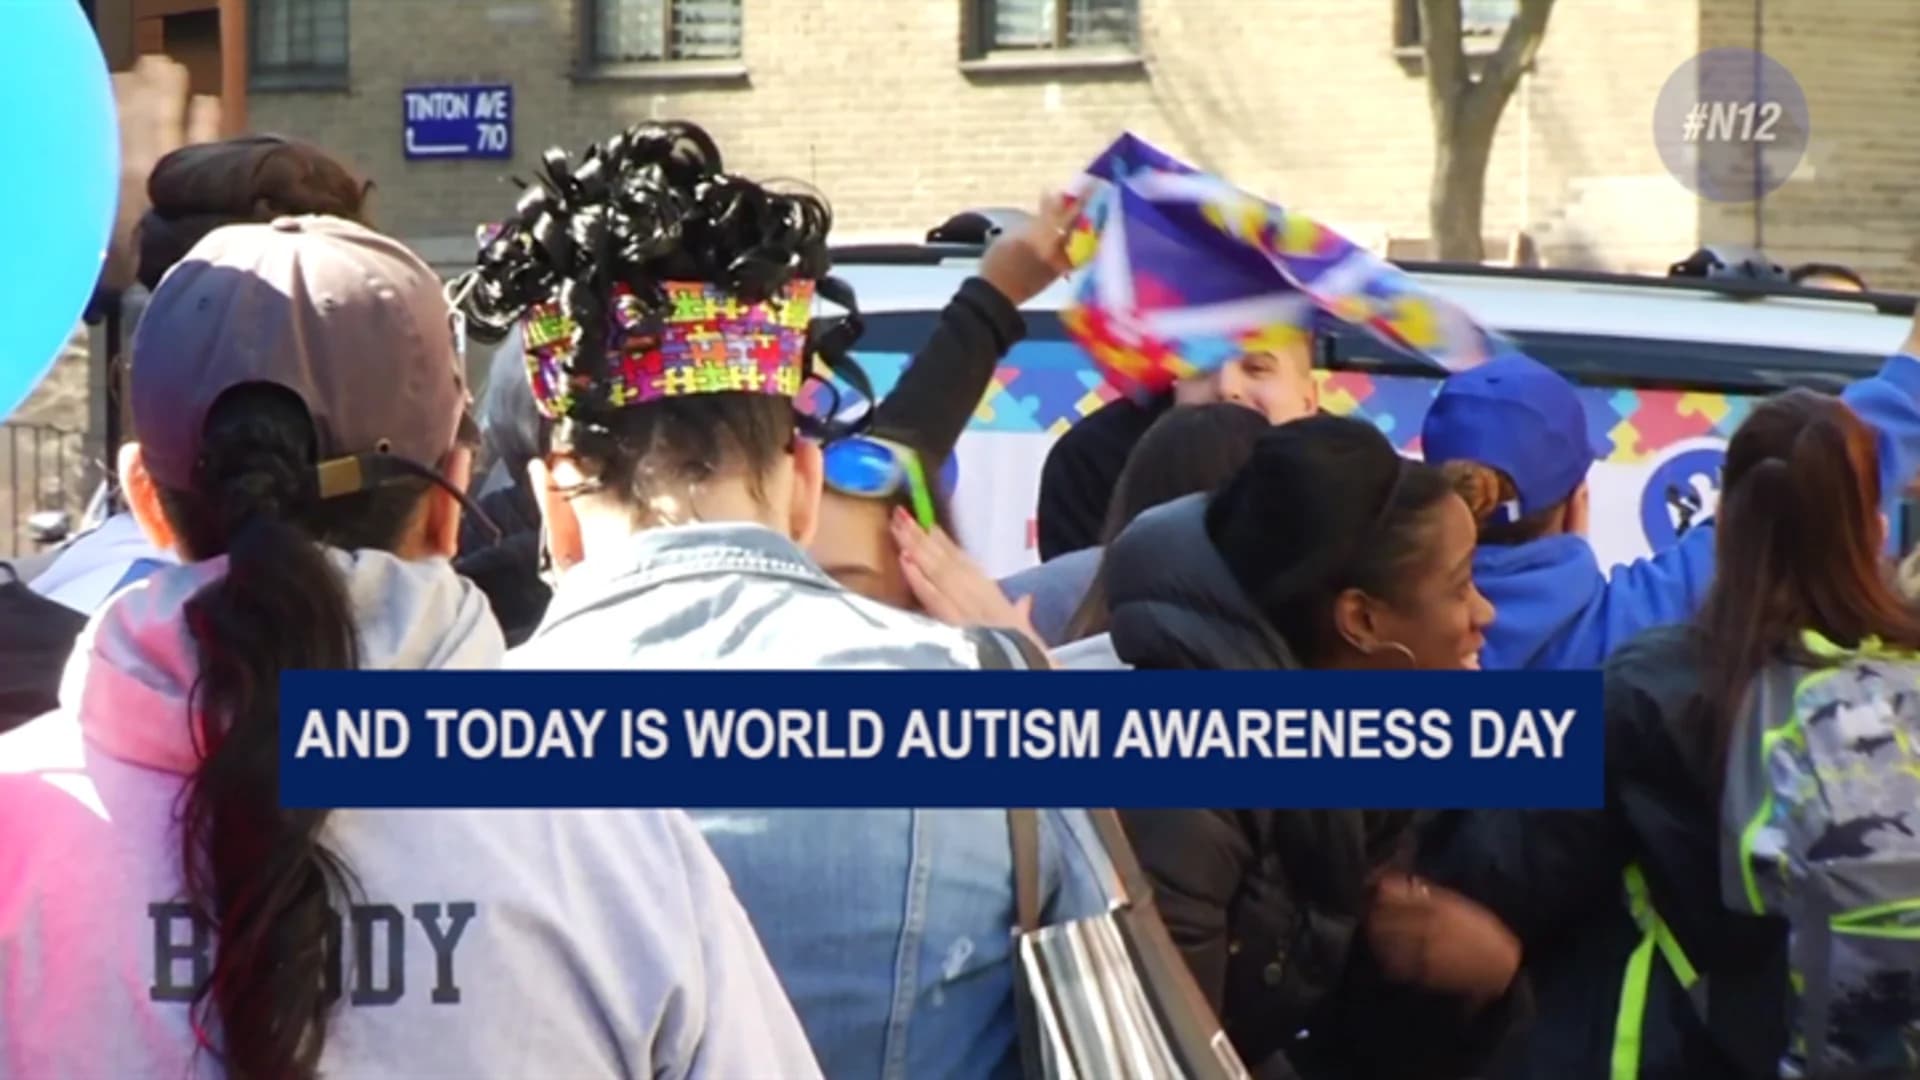 #N12BX: World Autism Awareness Day